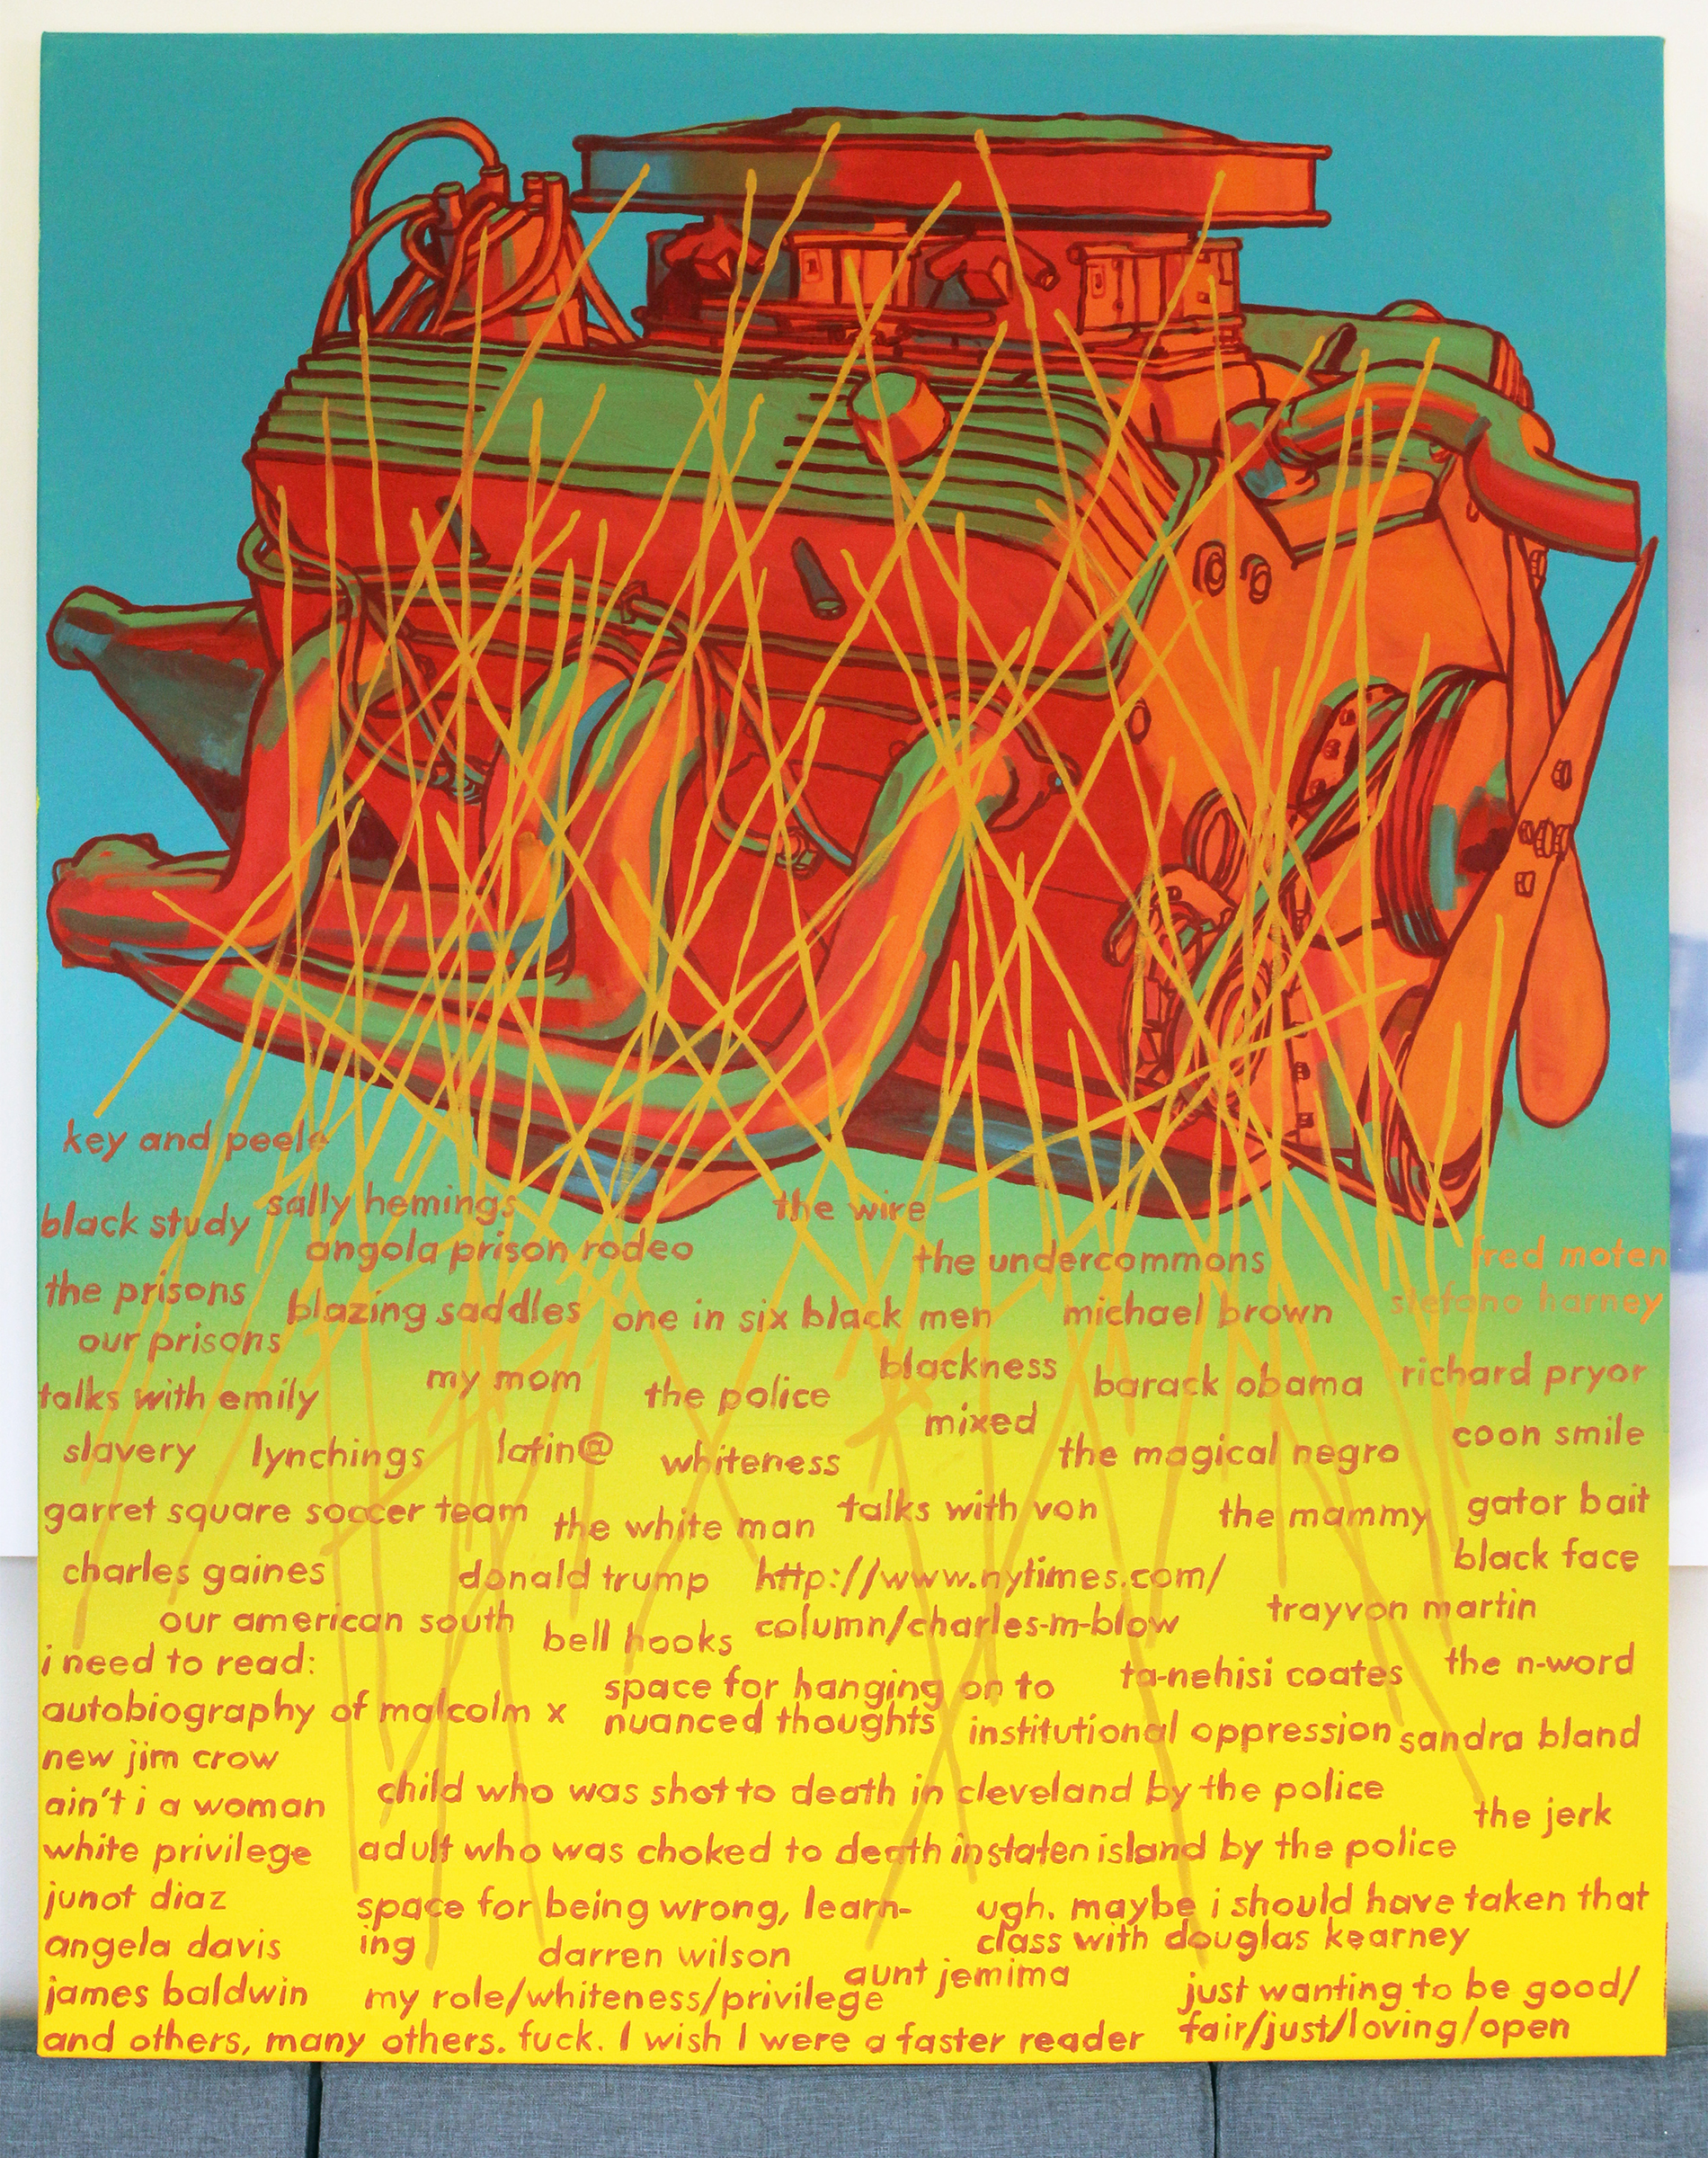 A painting of a car engine diagram with light brown text and a gradient background.